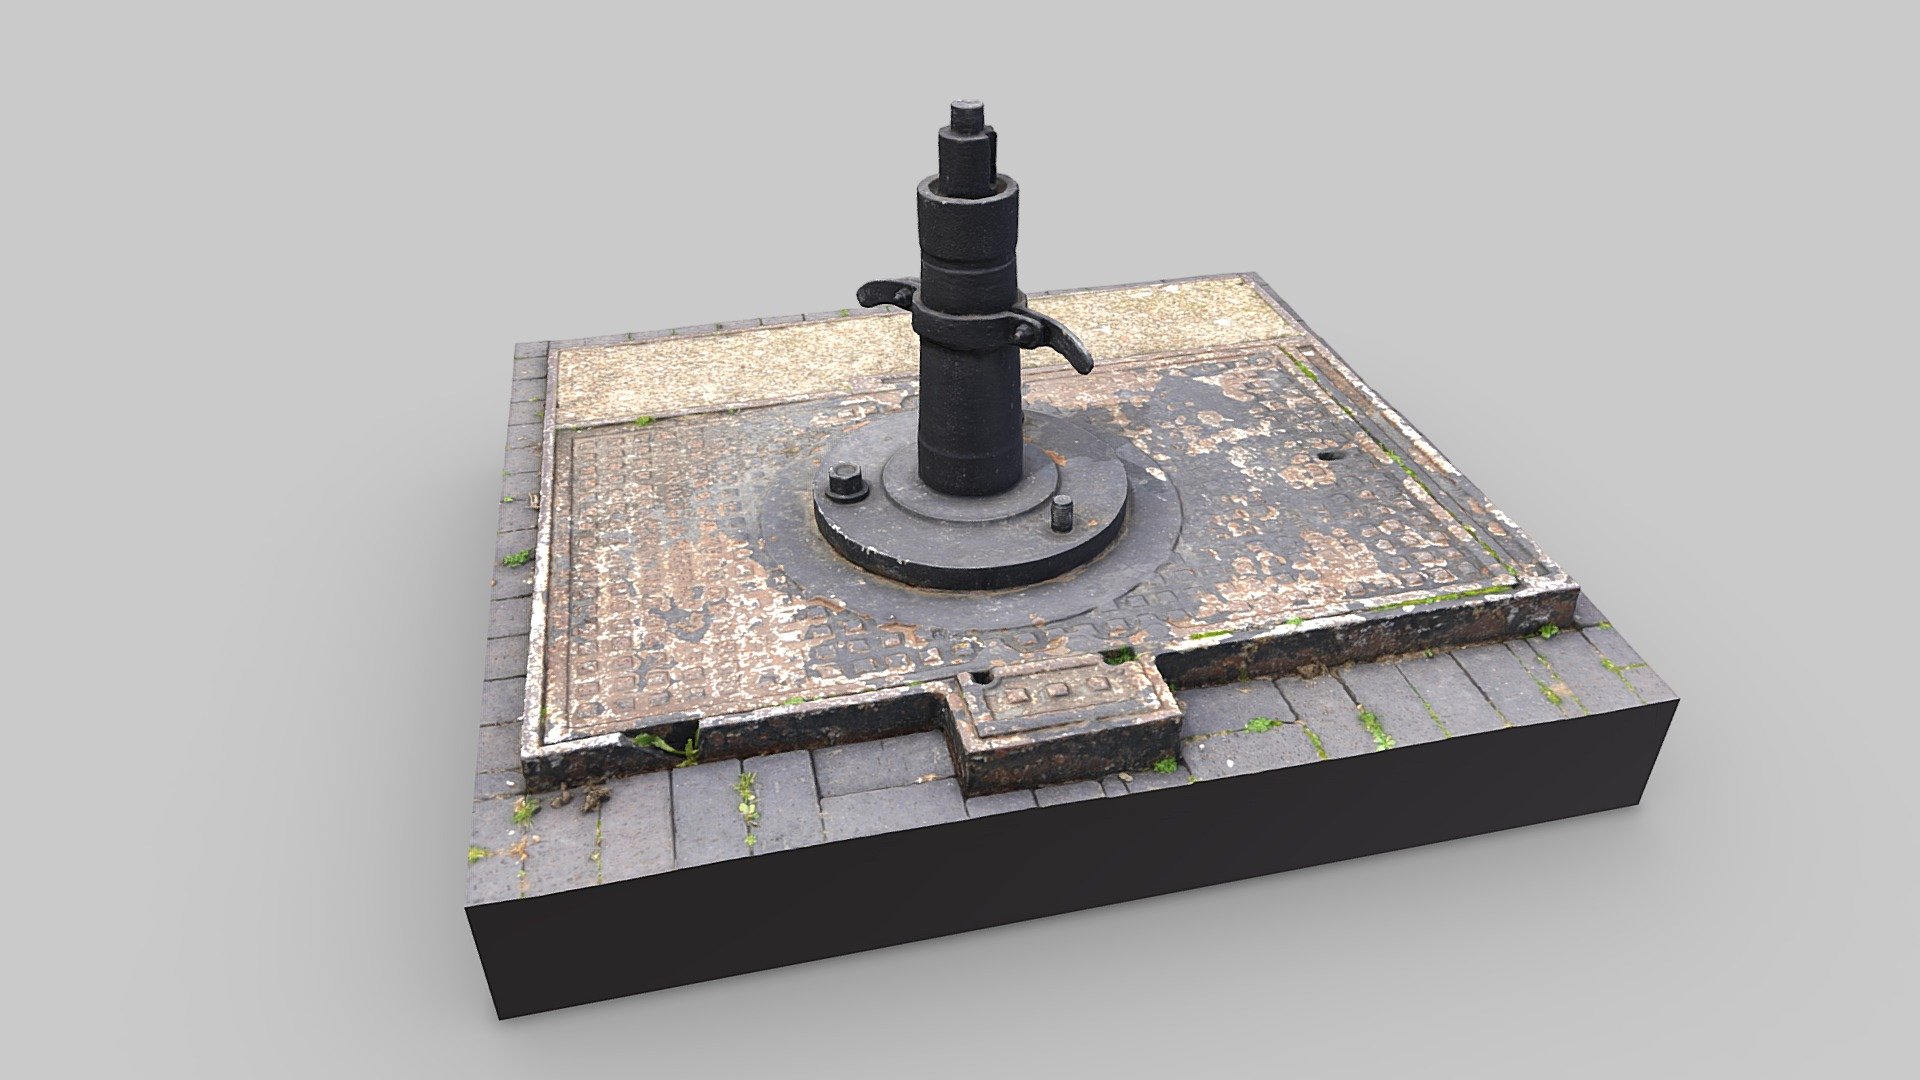 Photogrammetry scan of a small metal feature attached to a metal cover. Possibly and crane or winch attachment point. Located on the west side of the lock/canal between Blackwall Basin and Poplar Dock, Canary Wharf, London.

143 photos taken in December 2022 with a Sony a7R III and processed in Reality Capture.

Texture: diffuse 8192 x 8192 pixels 3d model